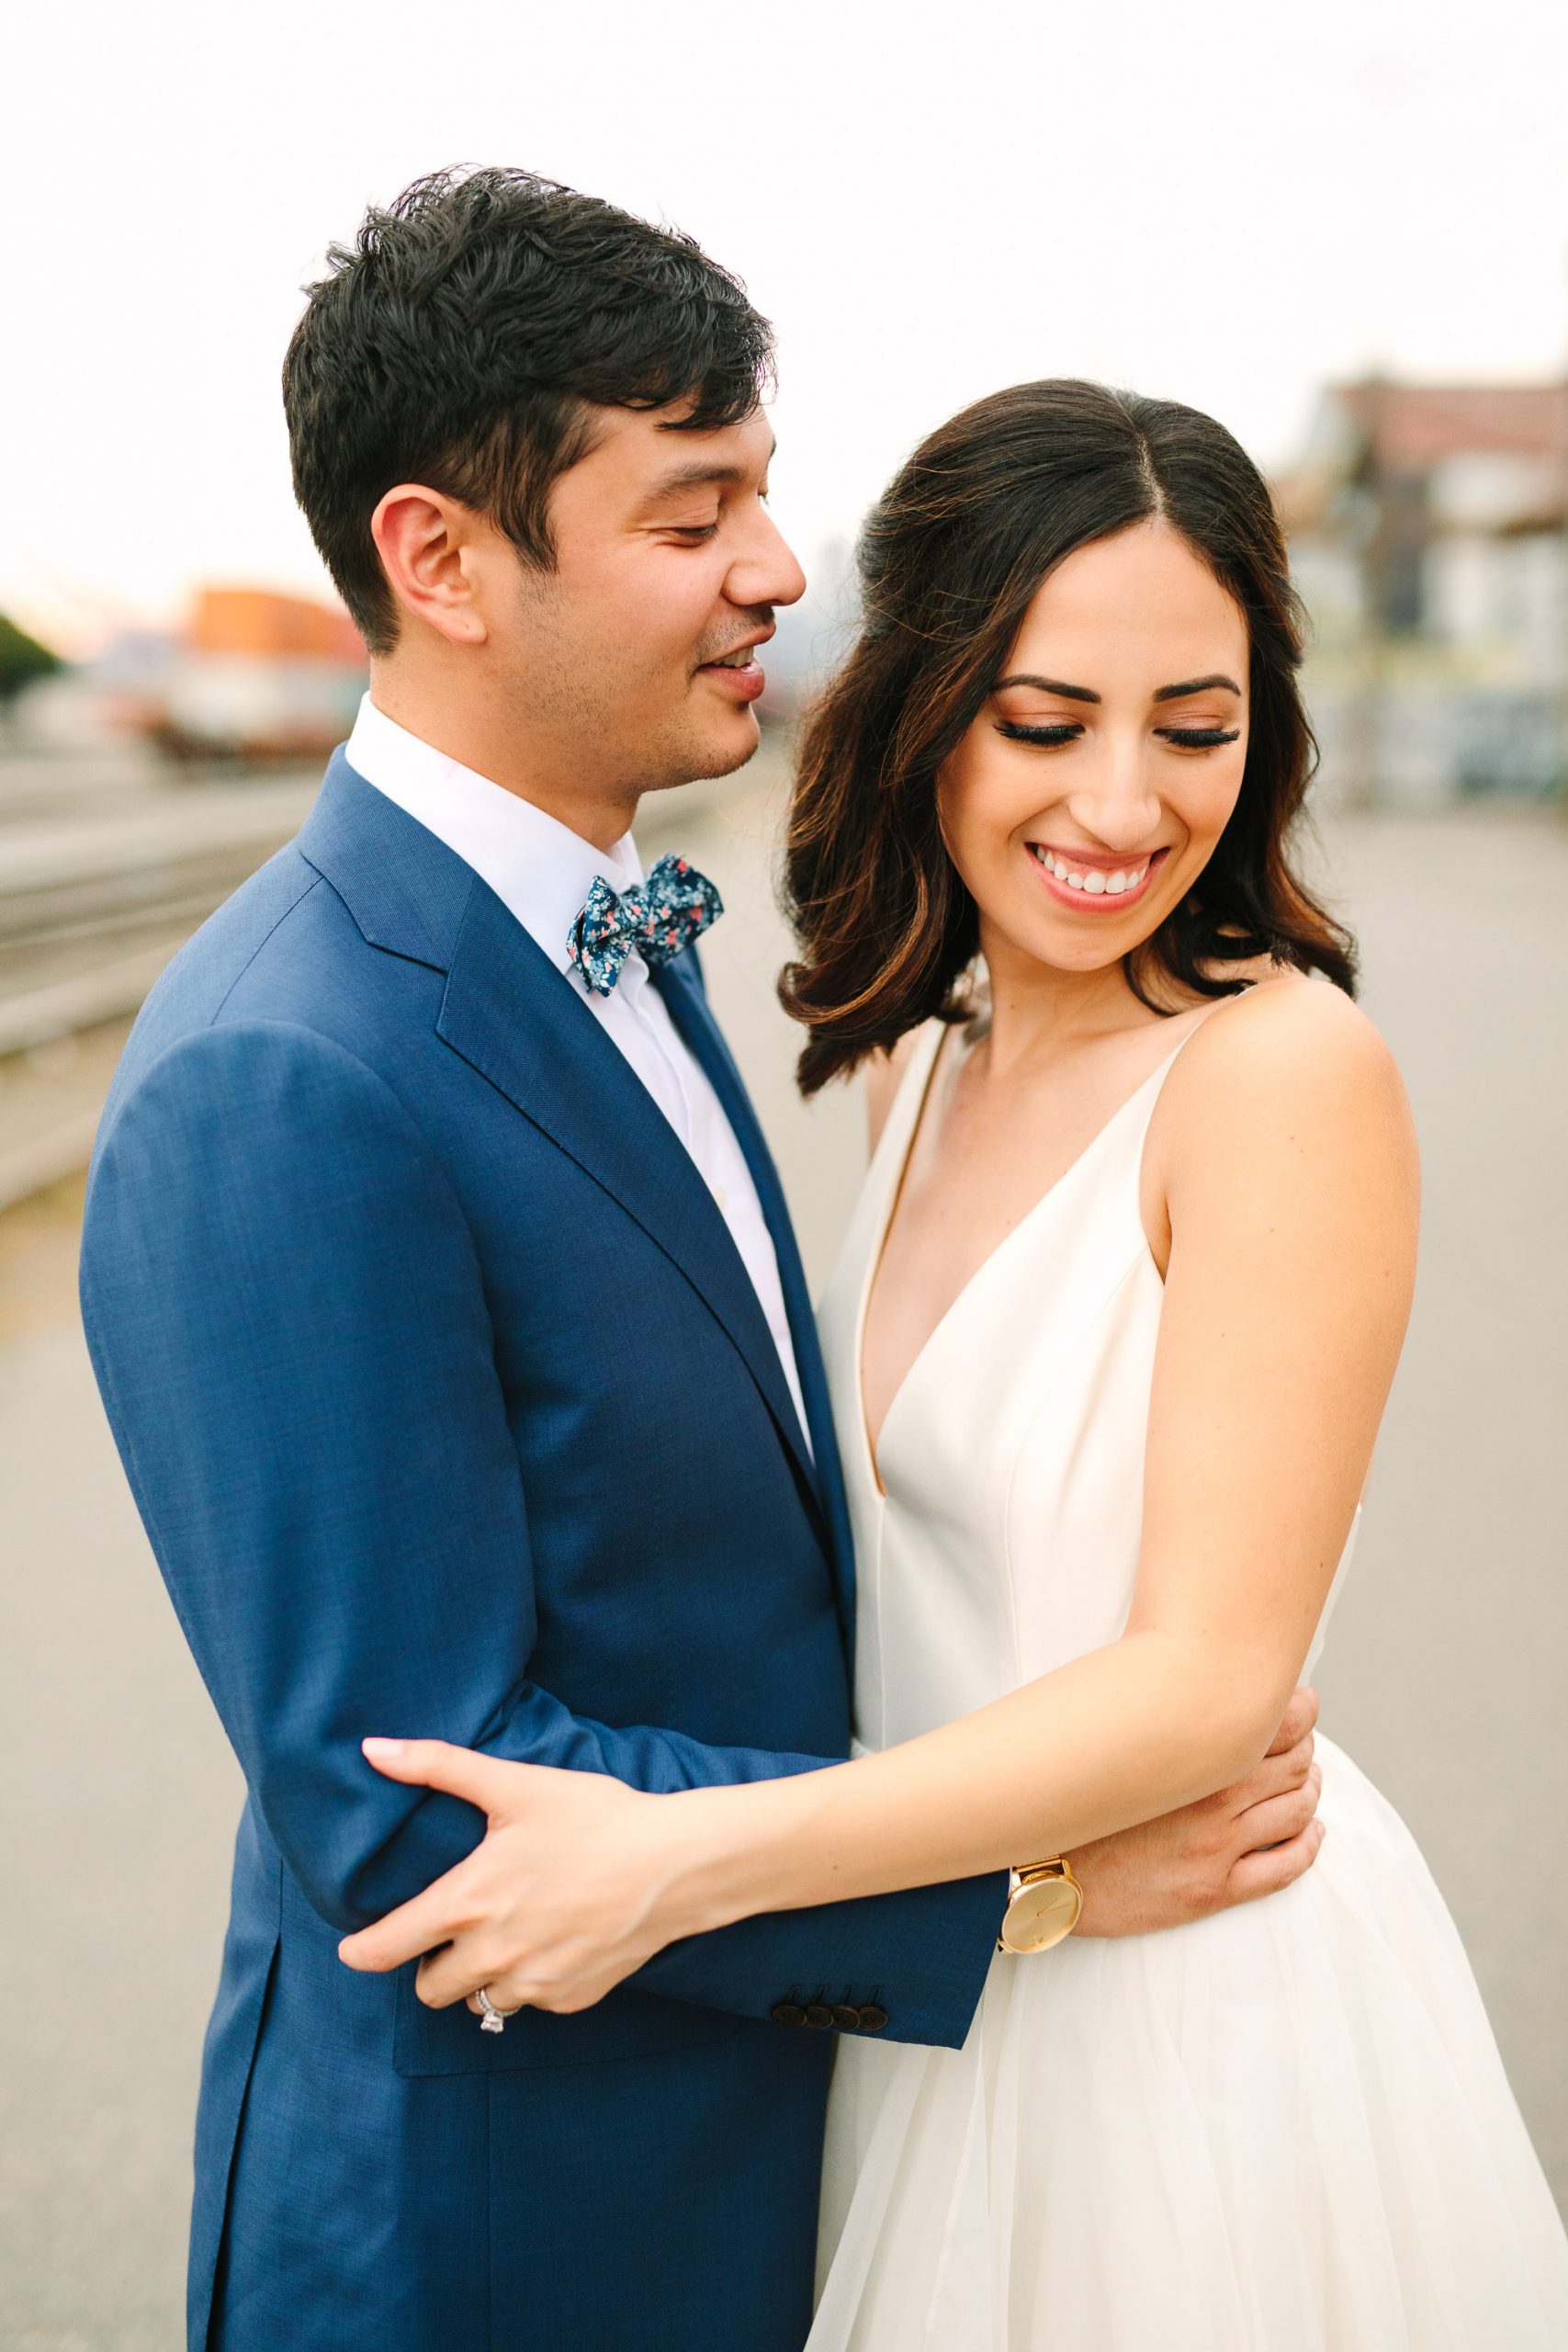 Seattle wedding portrait by Mary Costa Photography